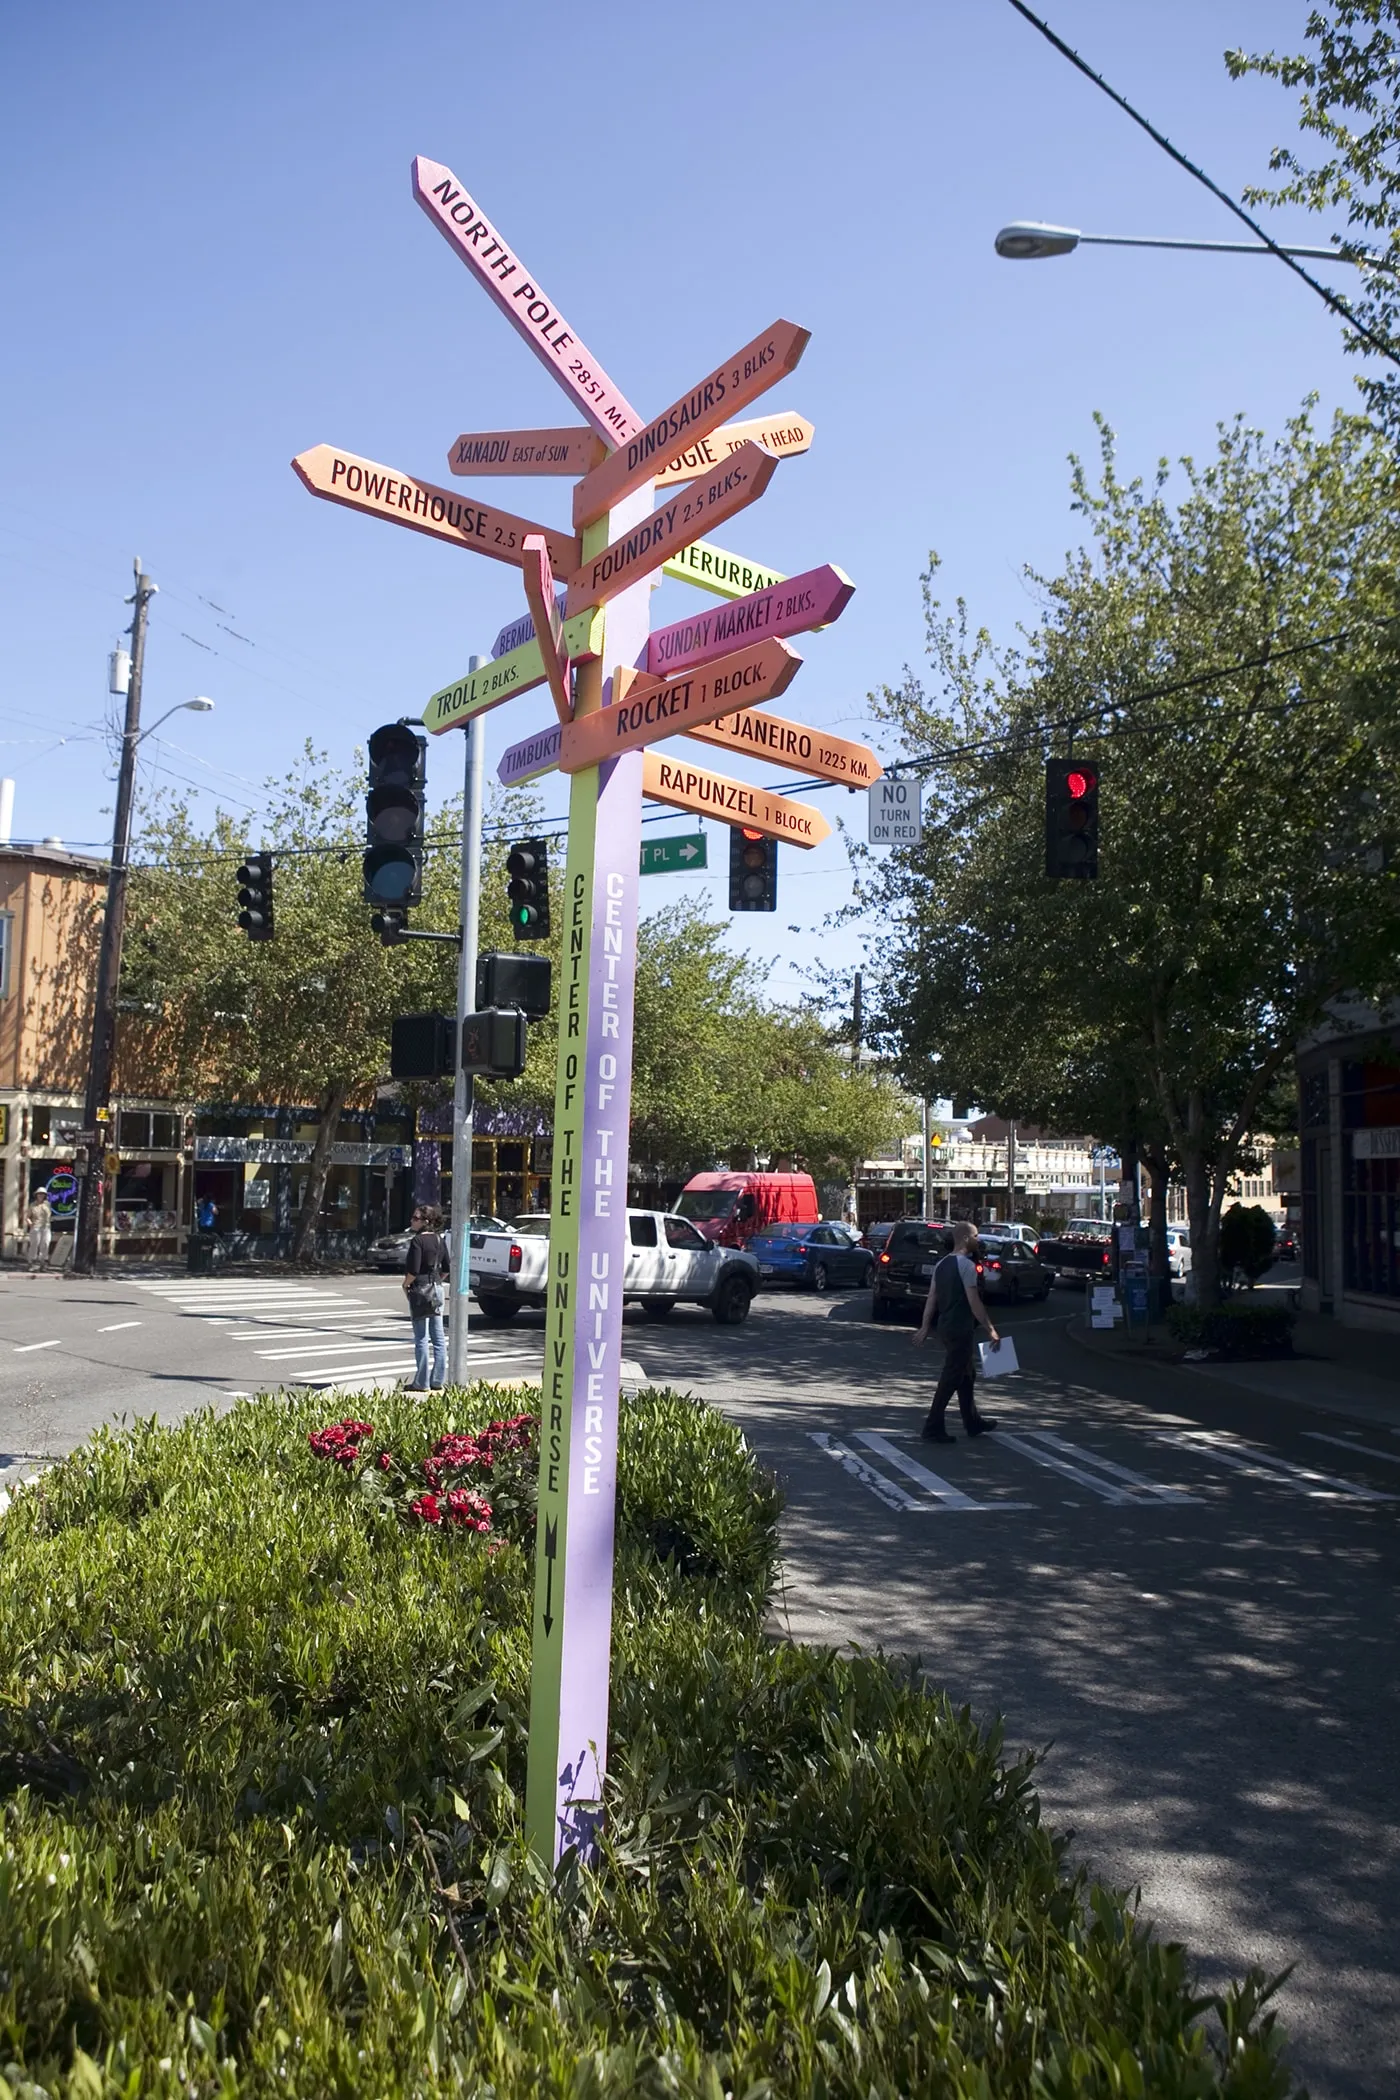 Guidepost in Fremont - the Center of the Universe - in Seattle, Washington.